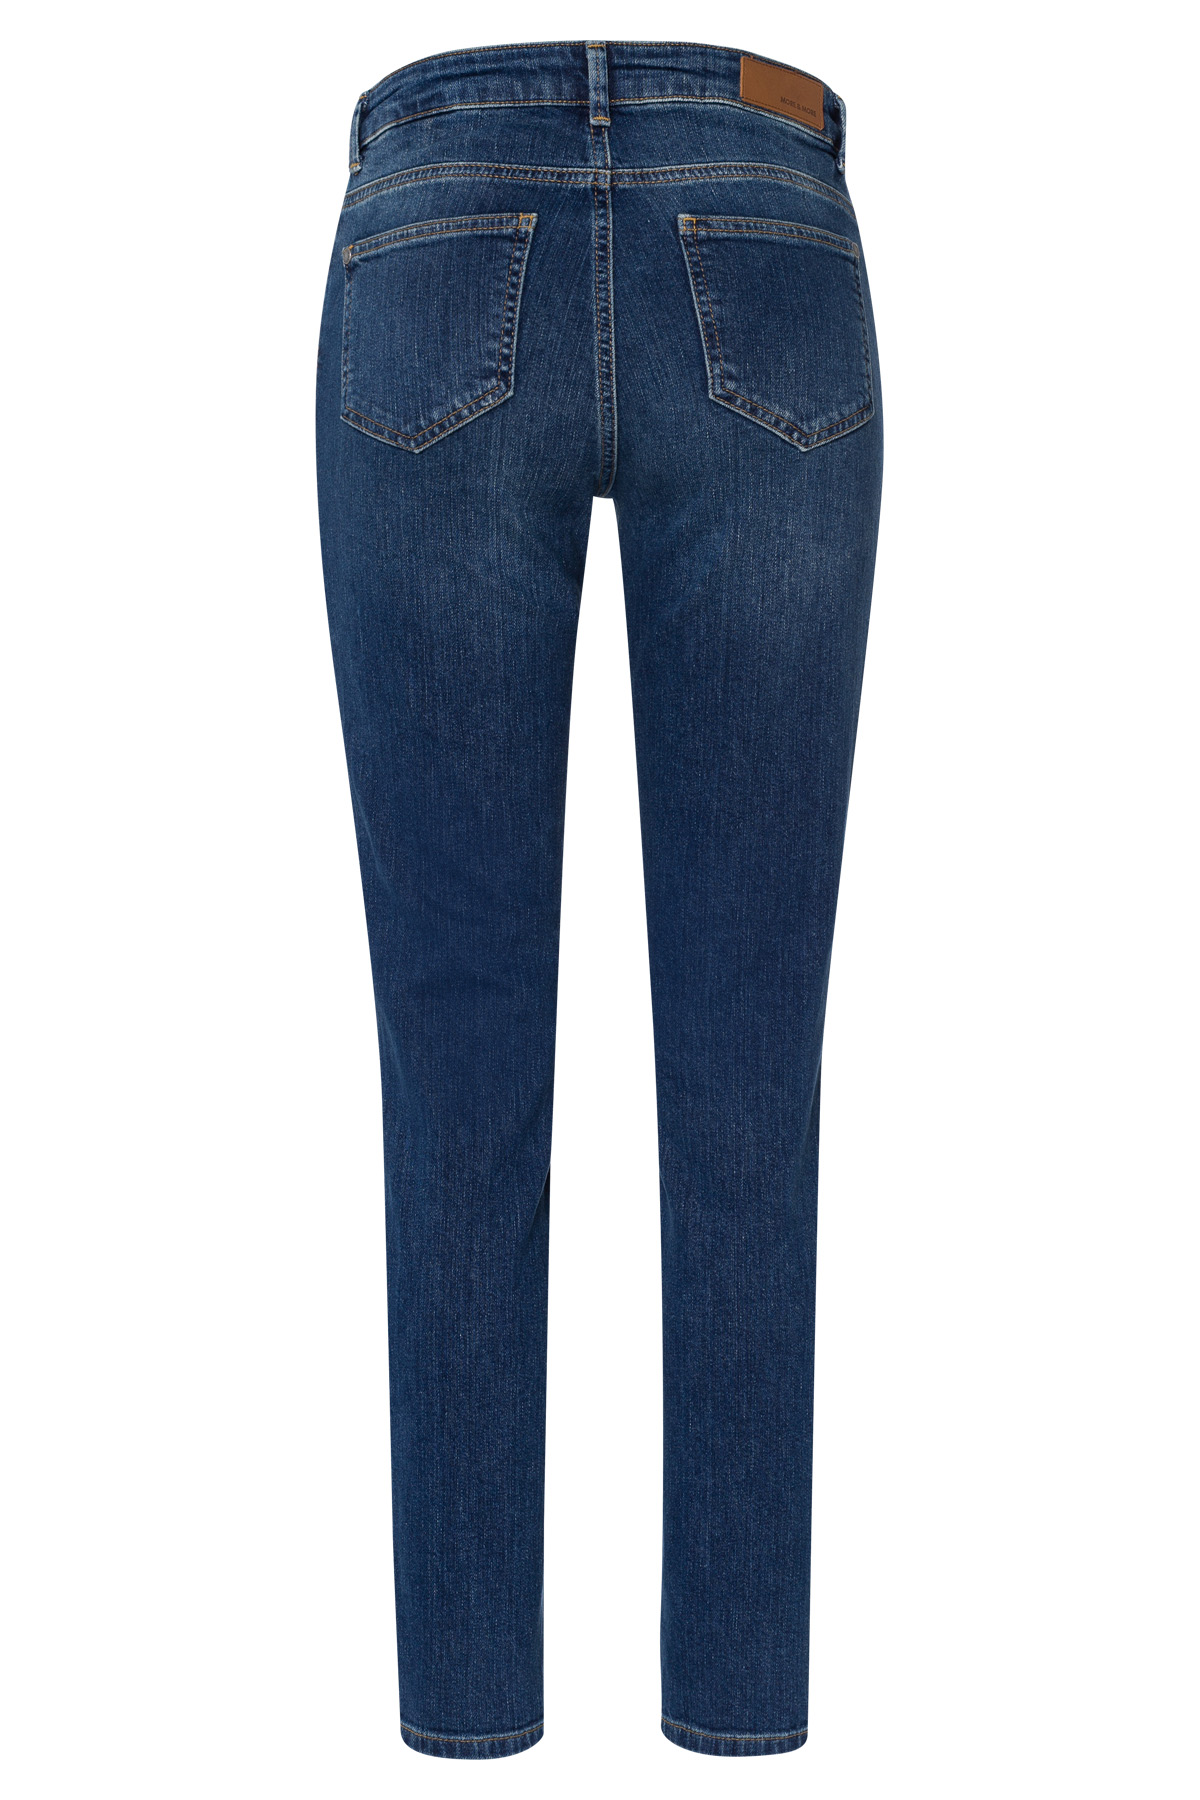 Q0By7 Donna MORE & MORE Jeans Hazel in Blu 